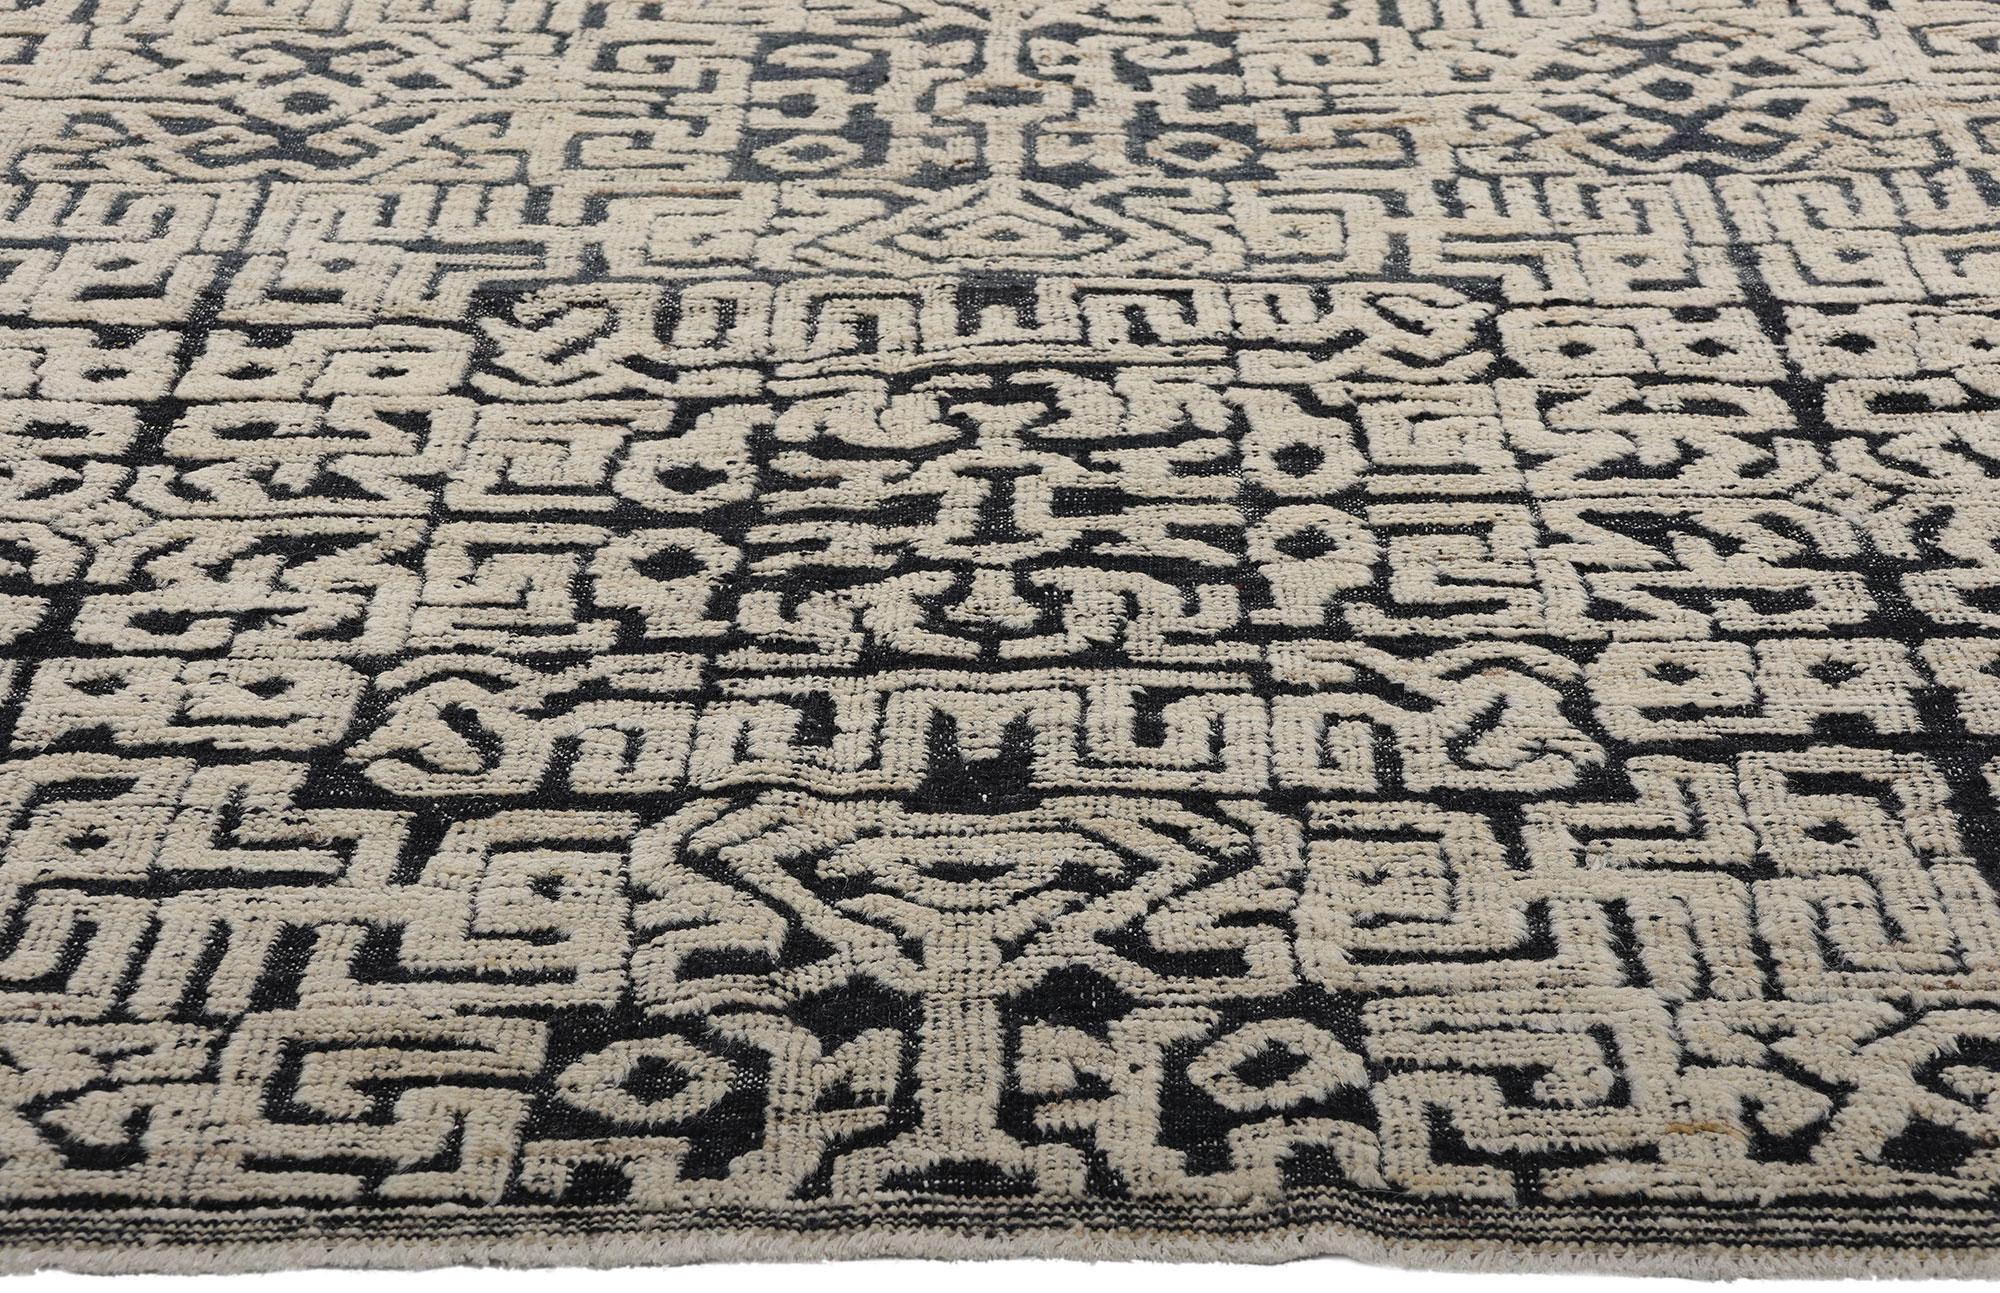 81085 Modern Geometric High-Low Moroccan Rug, 08'01 x 09'11. Behold the captivating convergence of cultural narratives and artisanal mastery embodied in this enchanting hand knotted wool Moroccan high-low wool pile rug. Revealing a mesmerizing